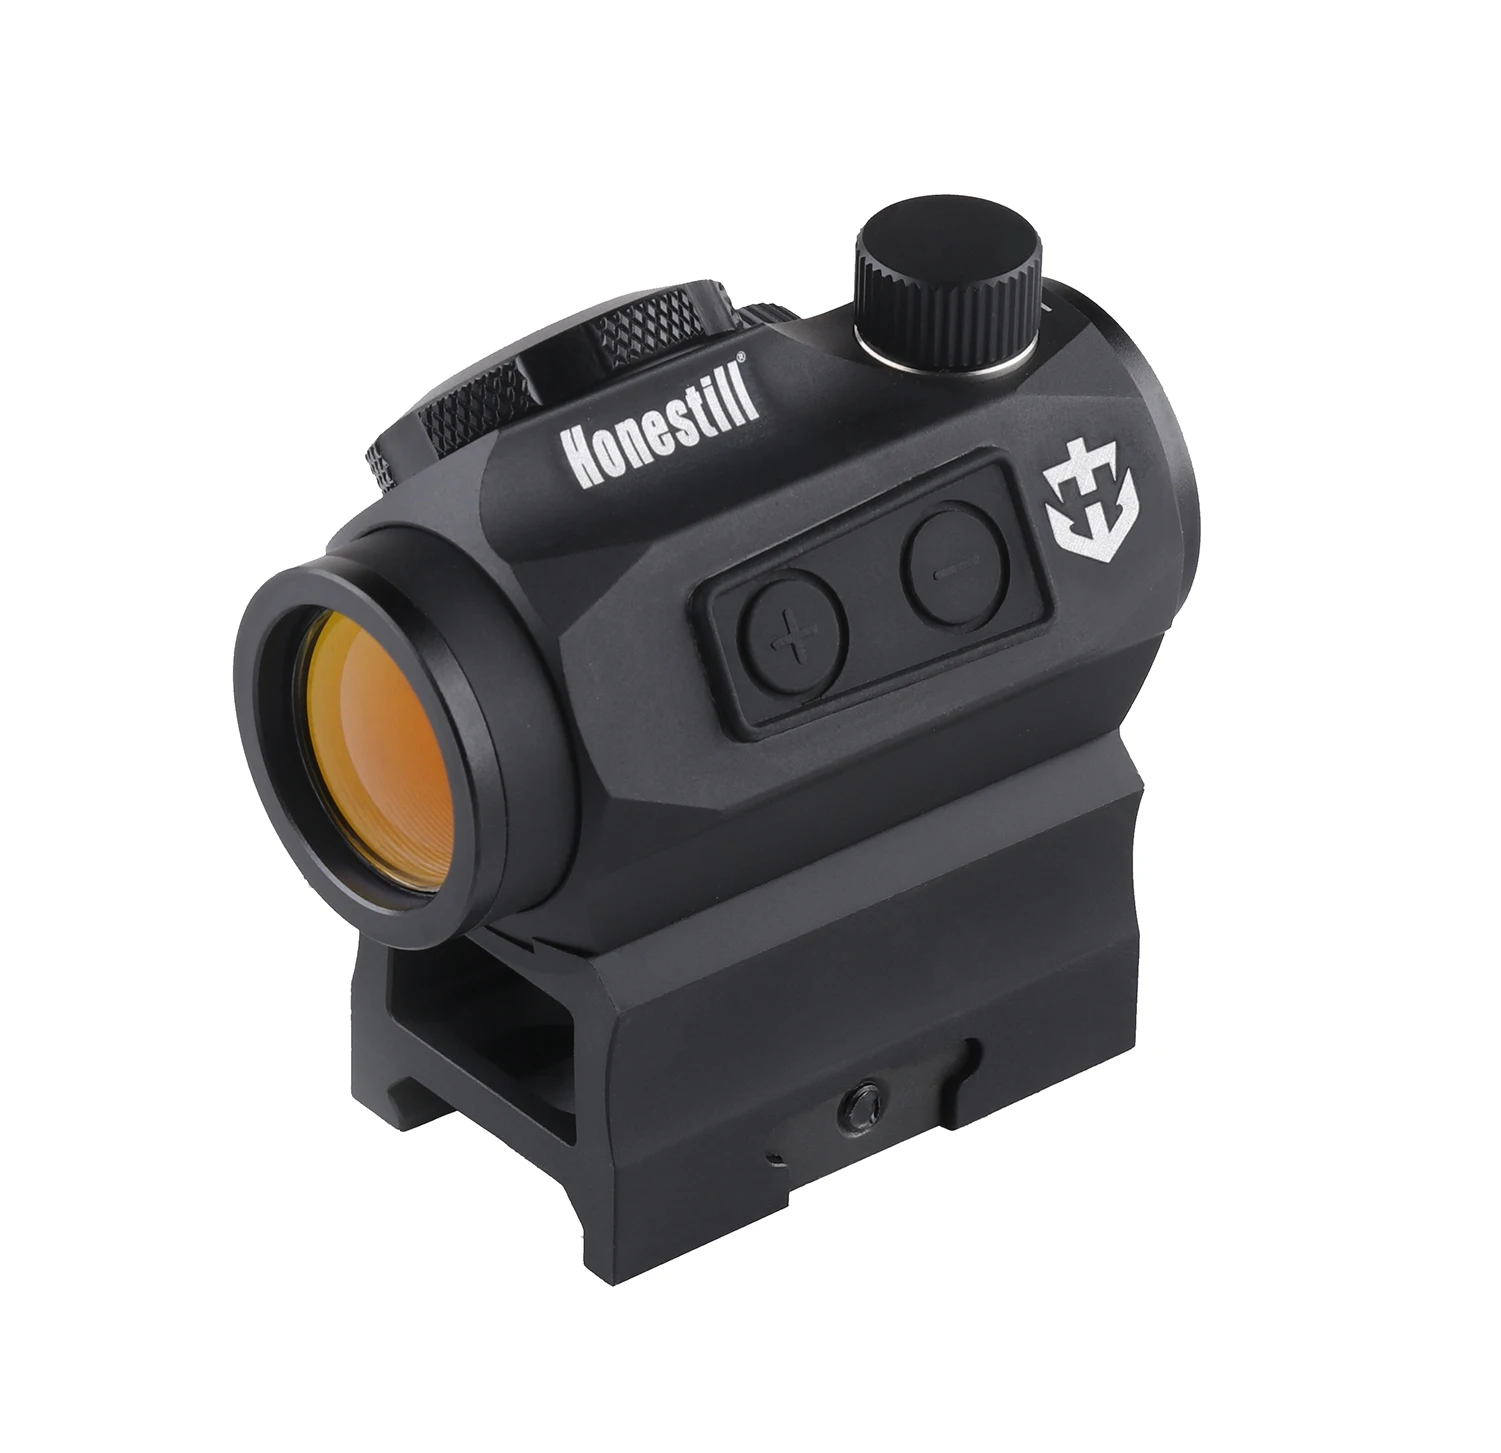 Tactical 2MOA 1x20mm Red Dot Sight Rifle Scope Motion Sensor Shake Awake with Riser Mount for Hunting